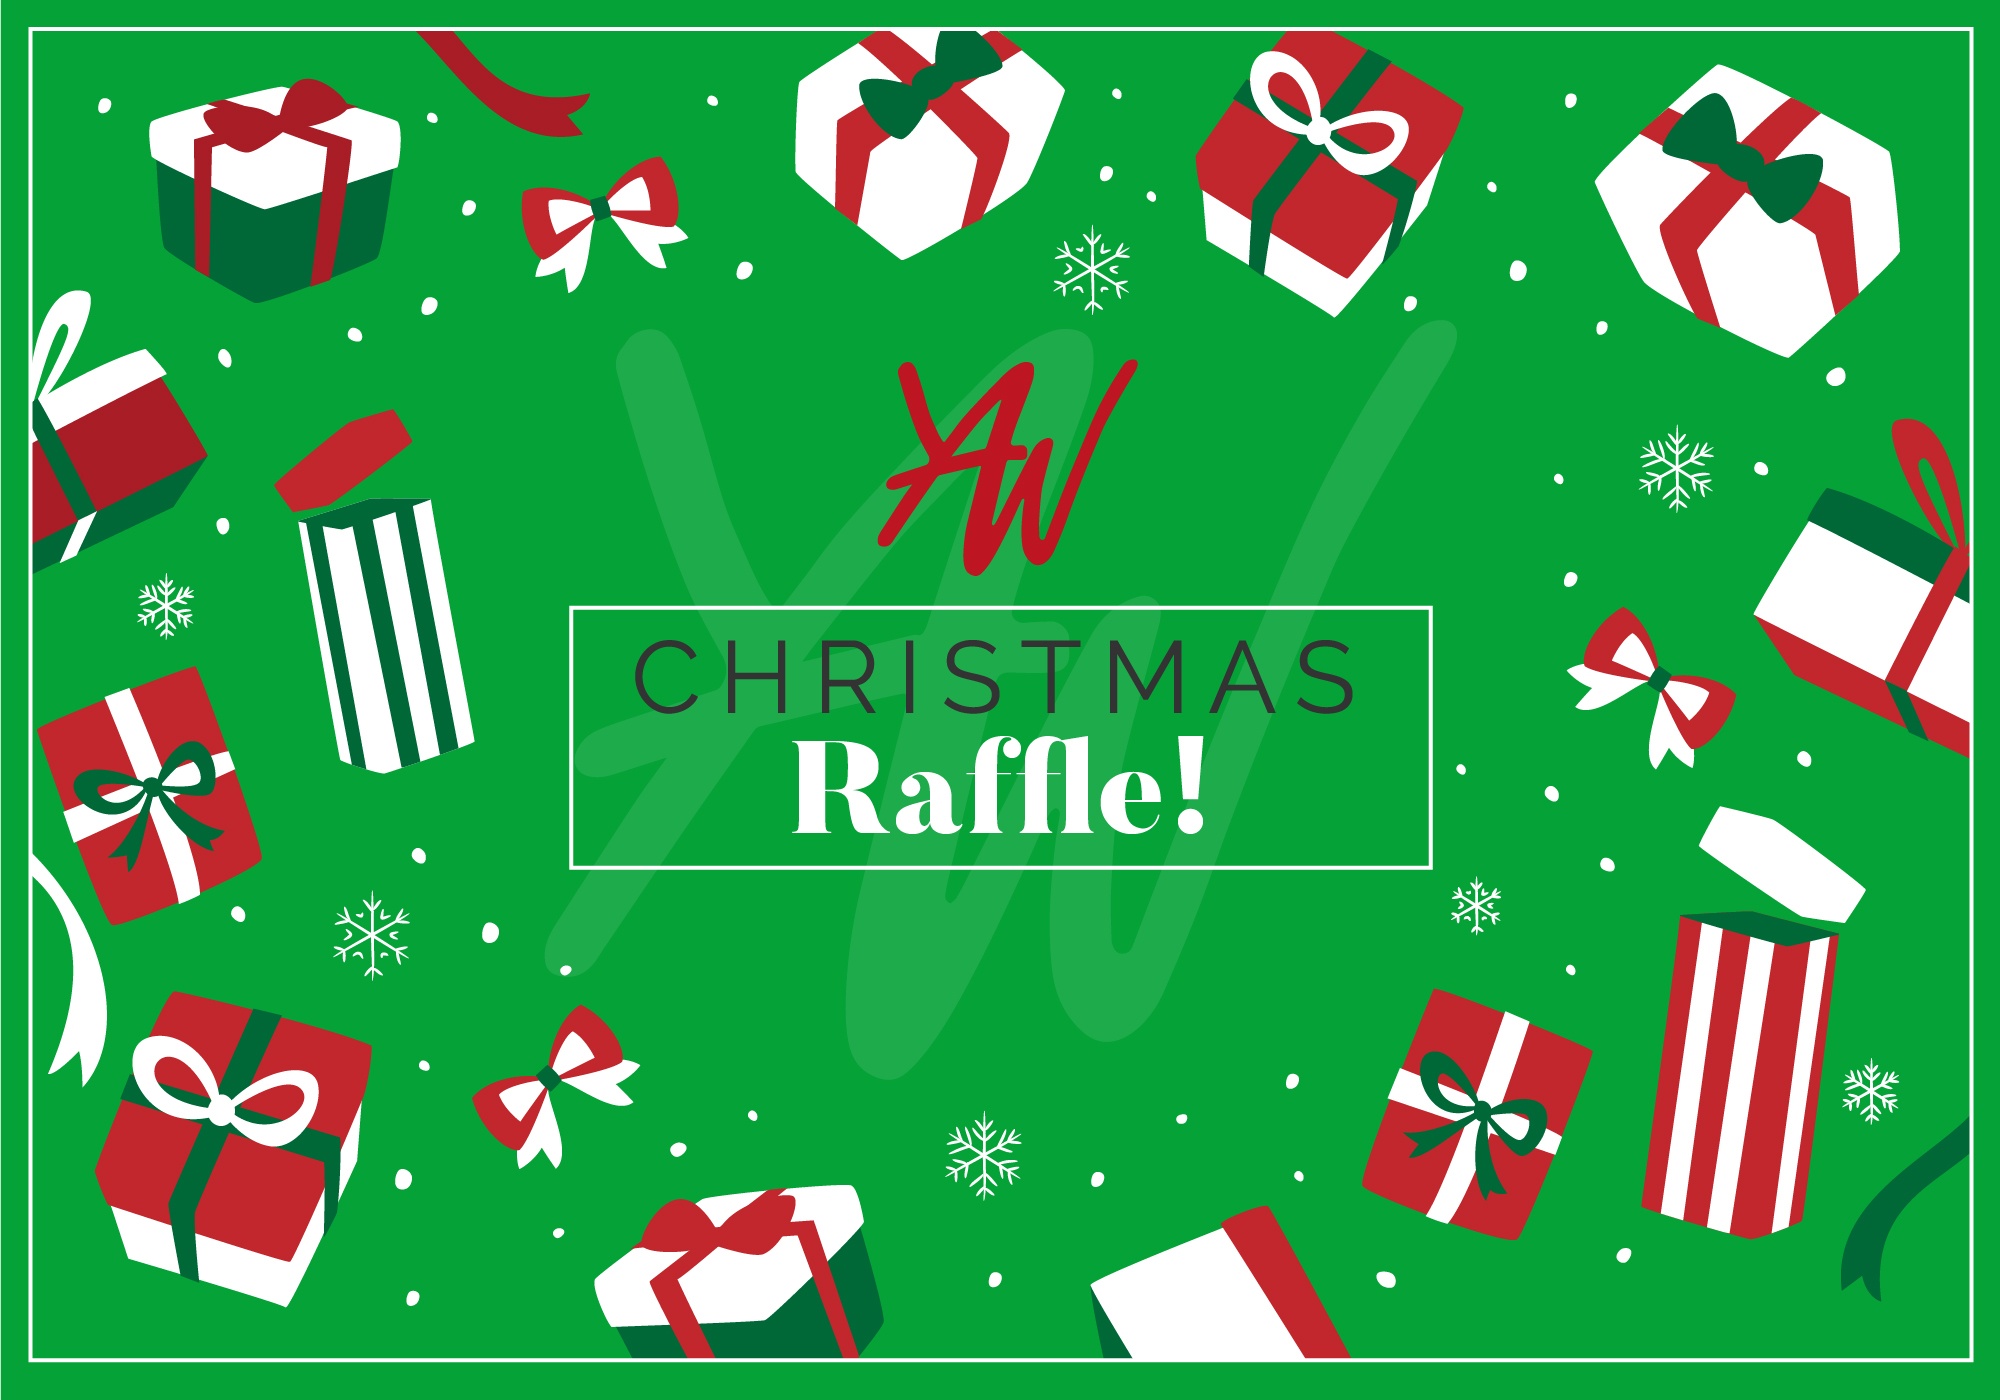 Youth Action Wiltshire Christmas Raffle 2020